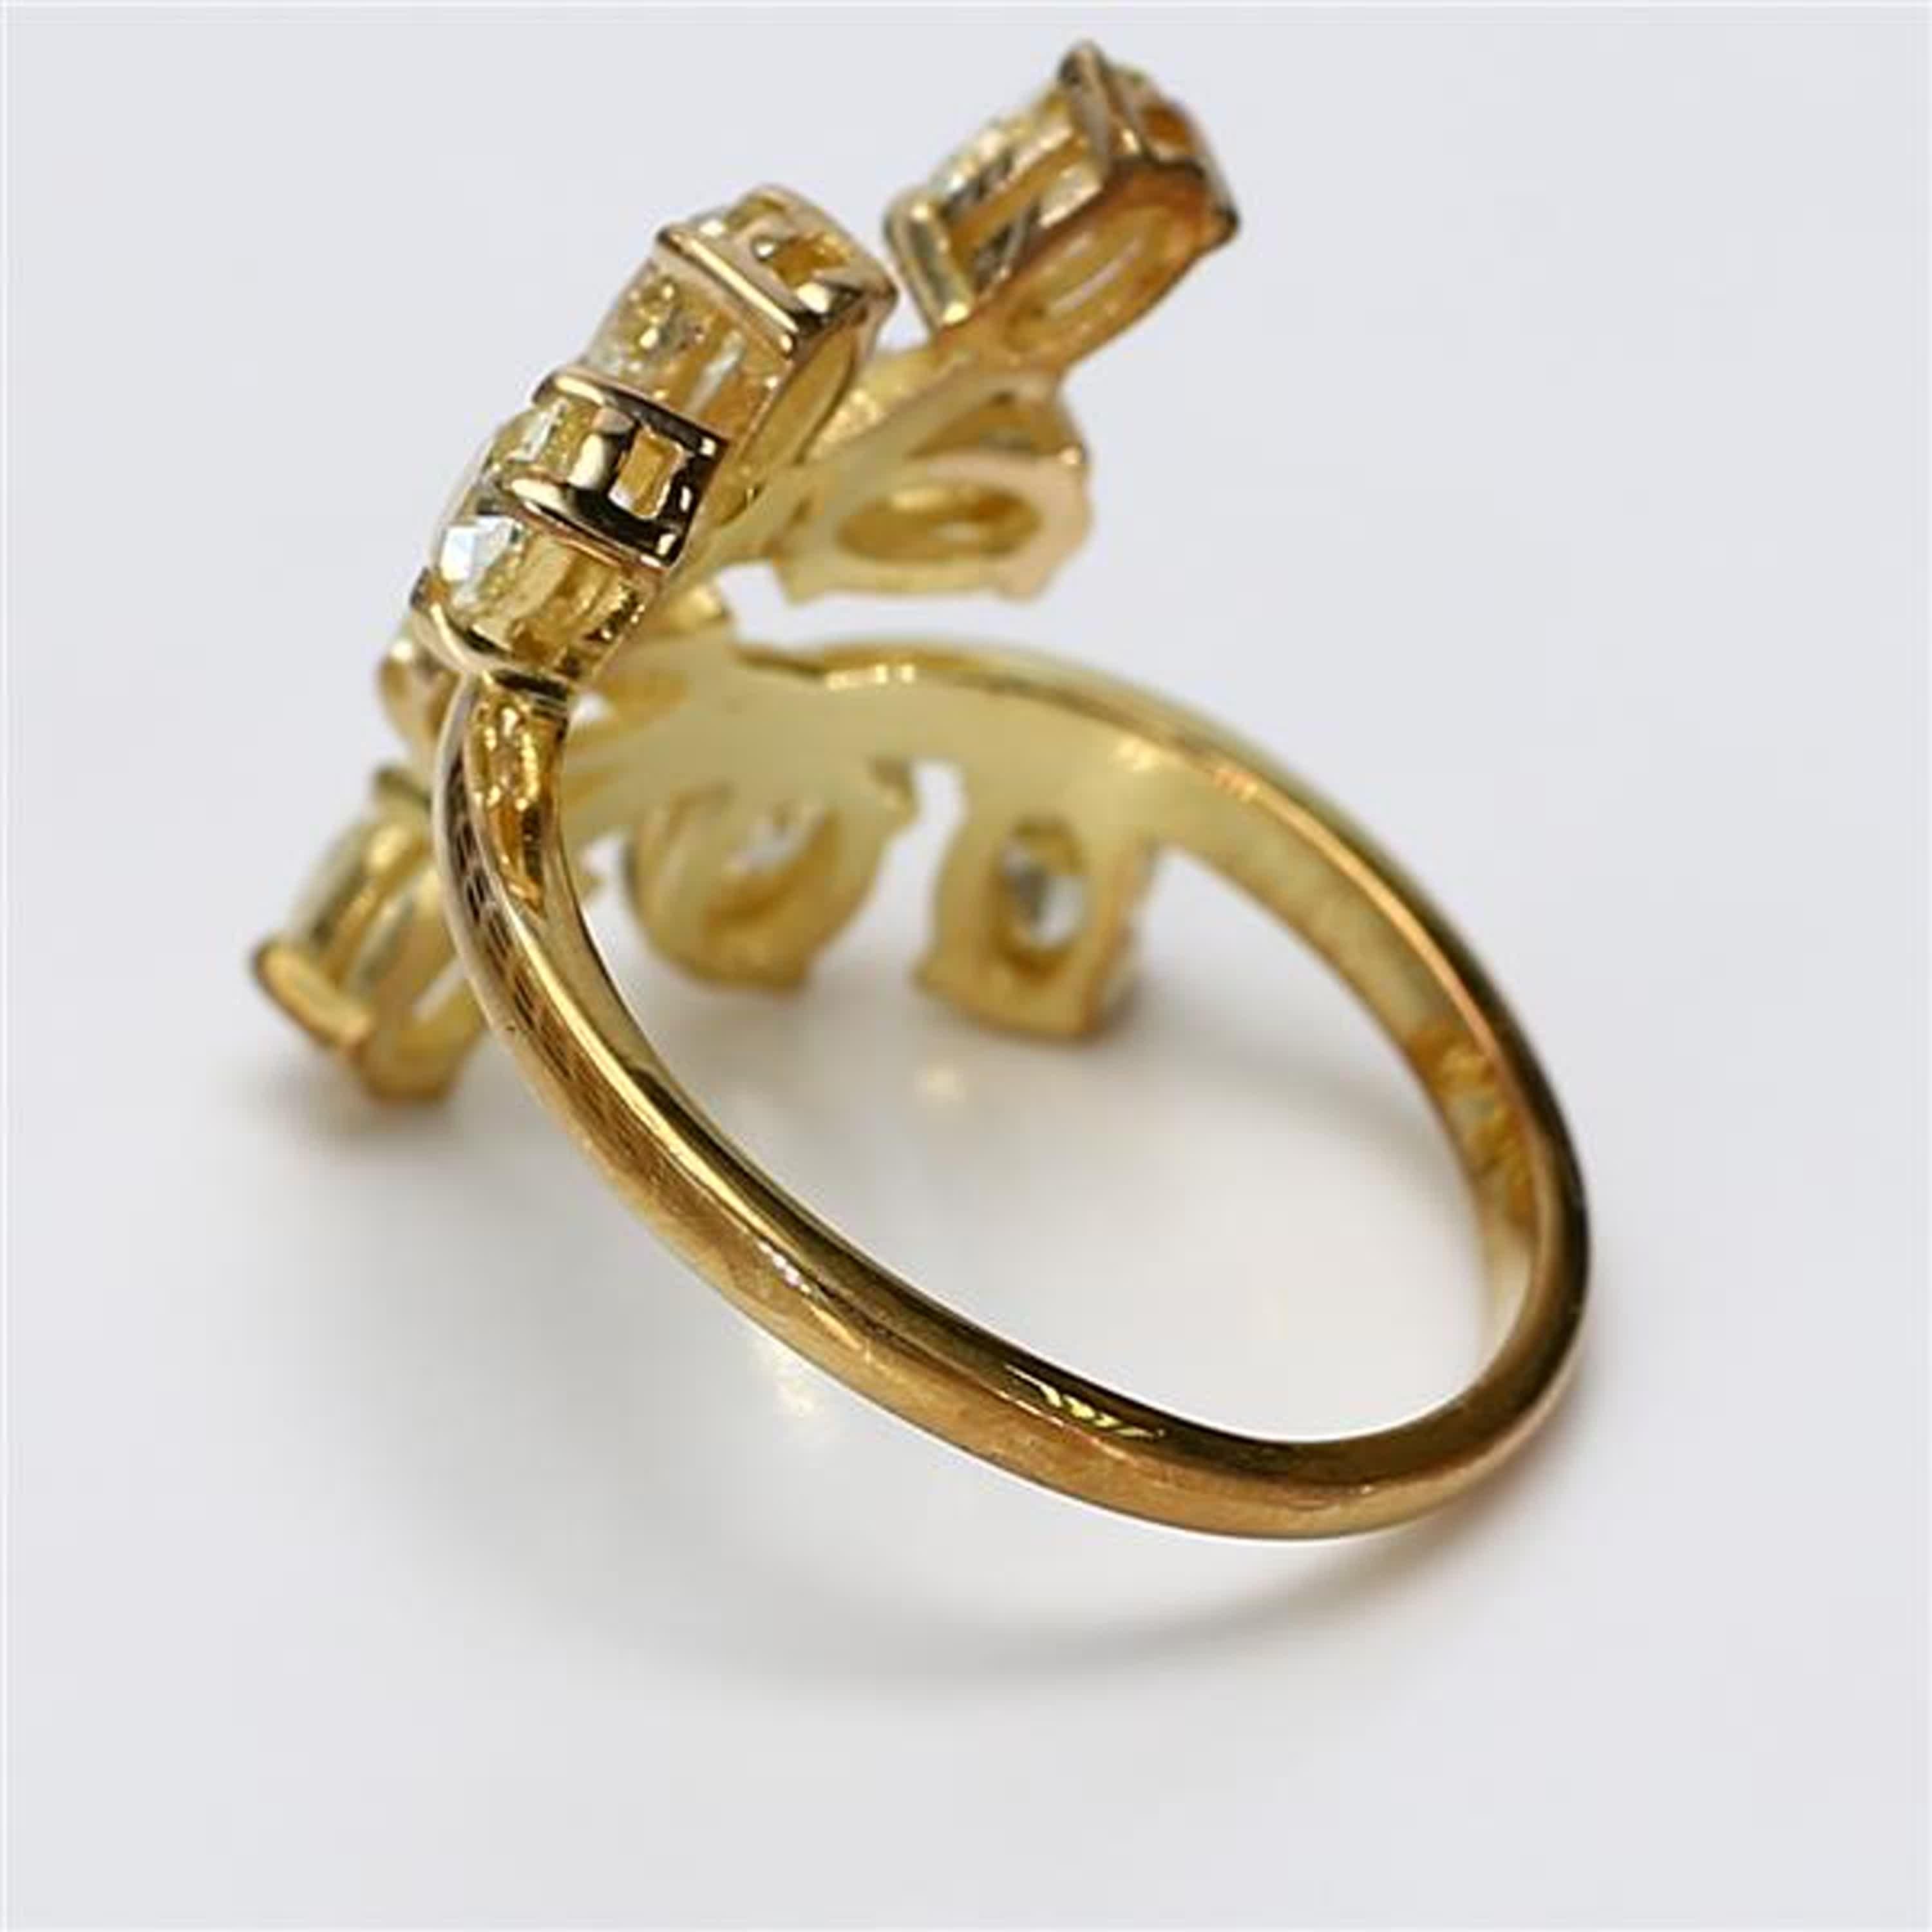 Oval Cut Natural Yellow Oval Diamond 1.45 Carat TW Yellow Gold Cocktail Ring